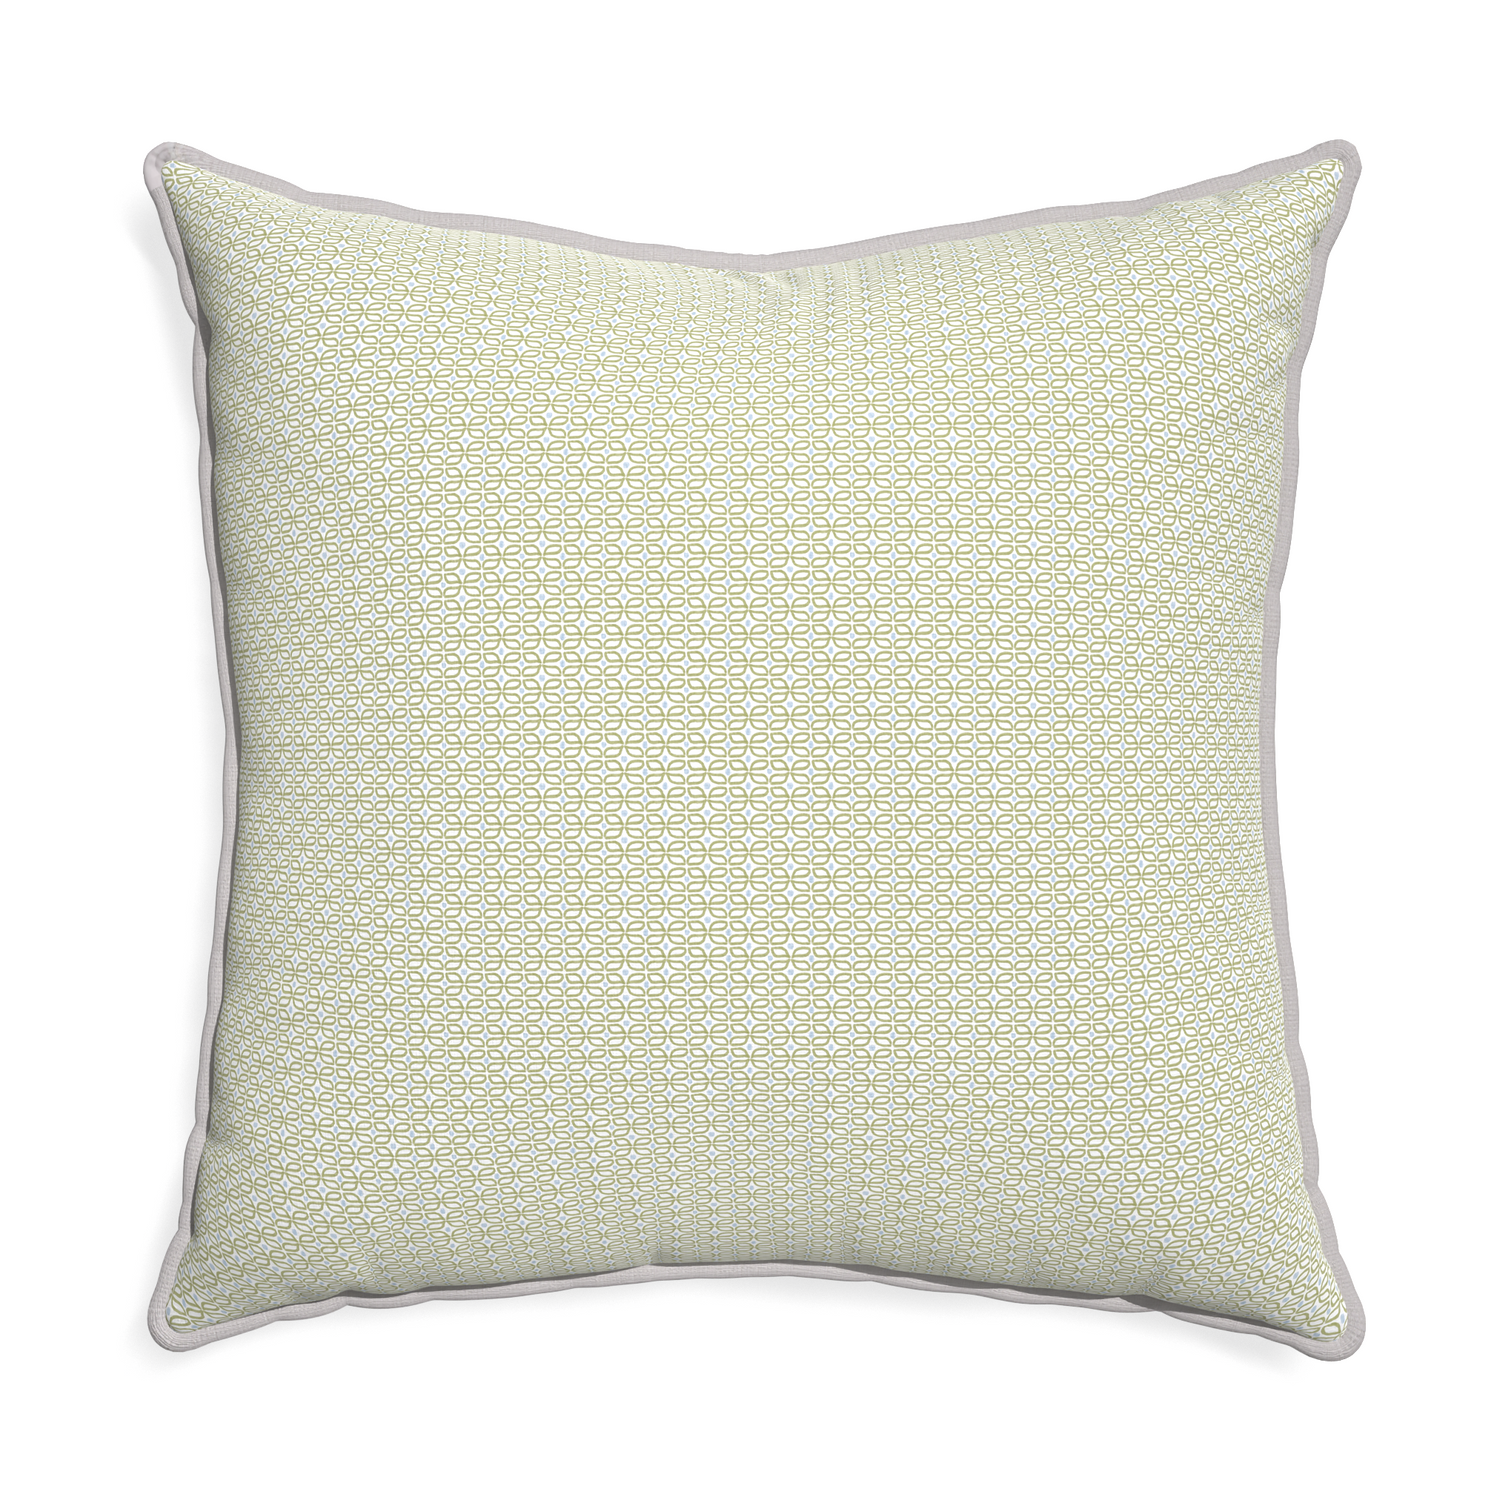 Euro-sham loomi moss custom moss green geometricpillow with pebble piping on white background